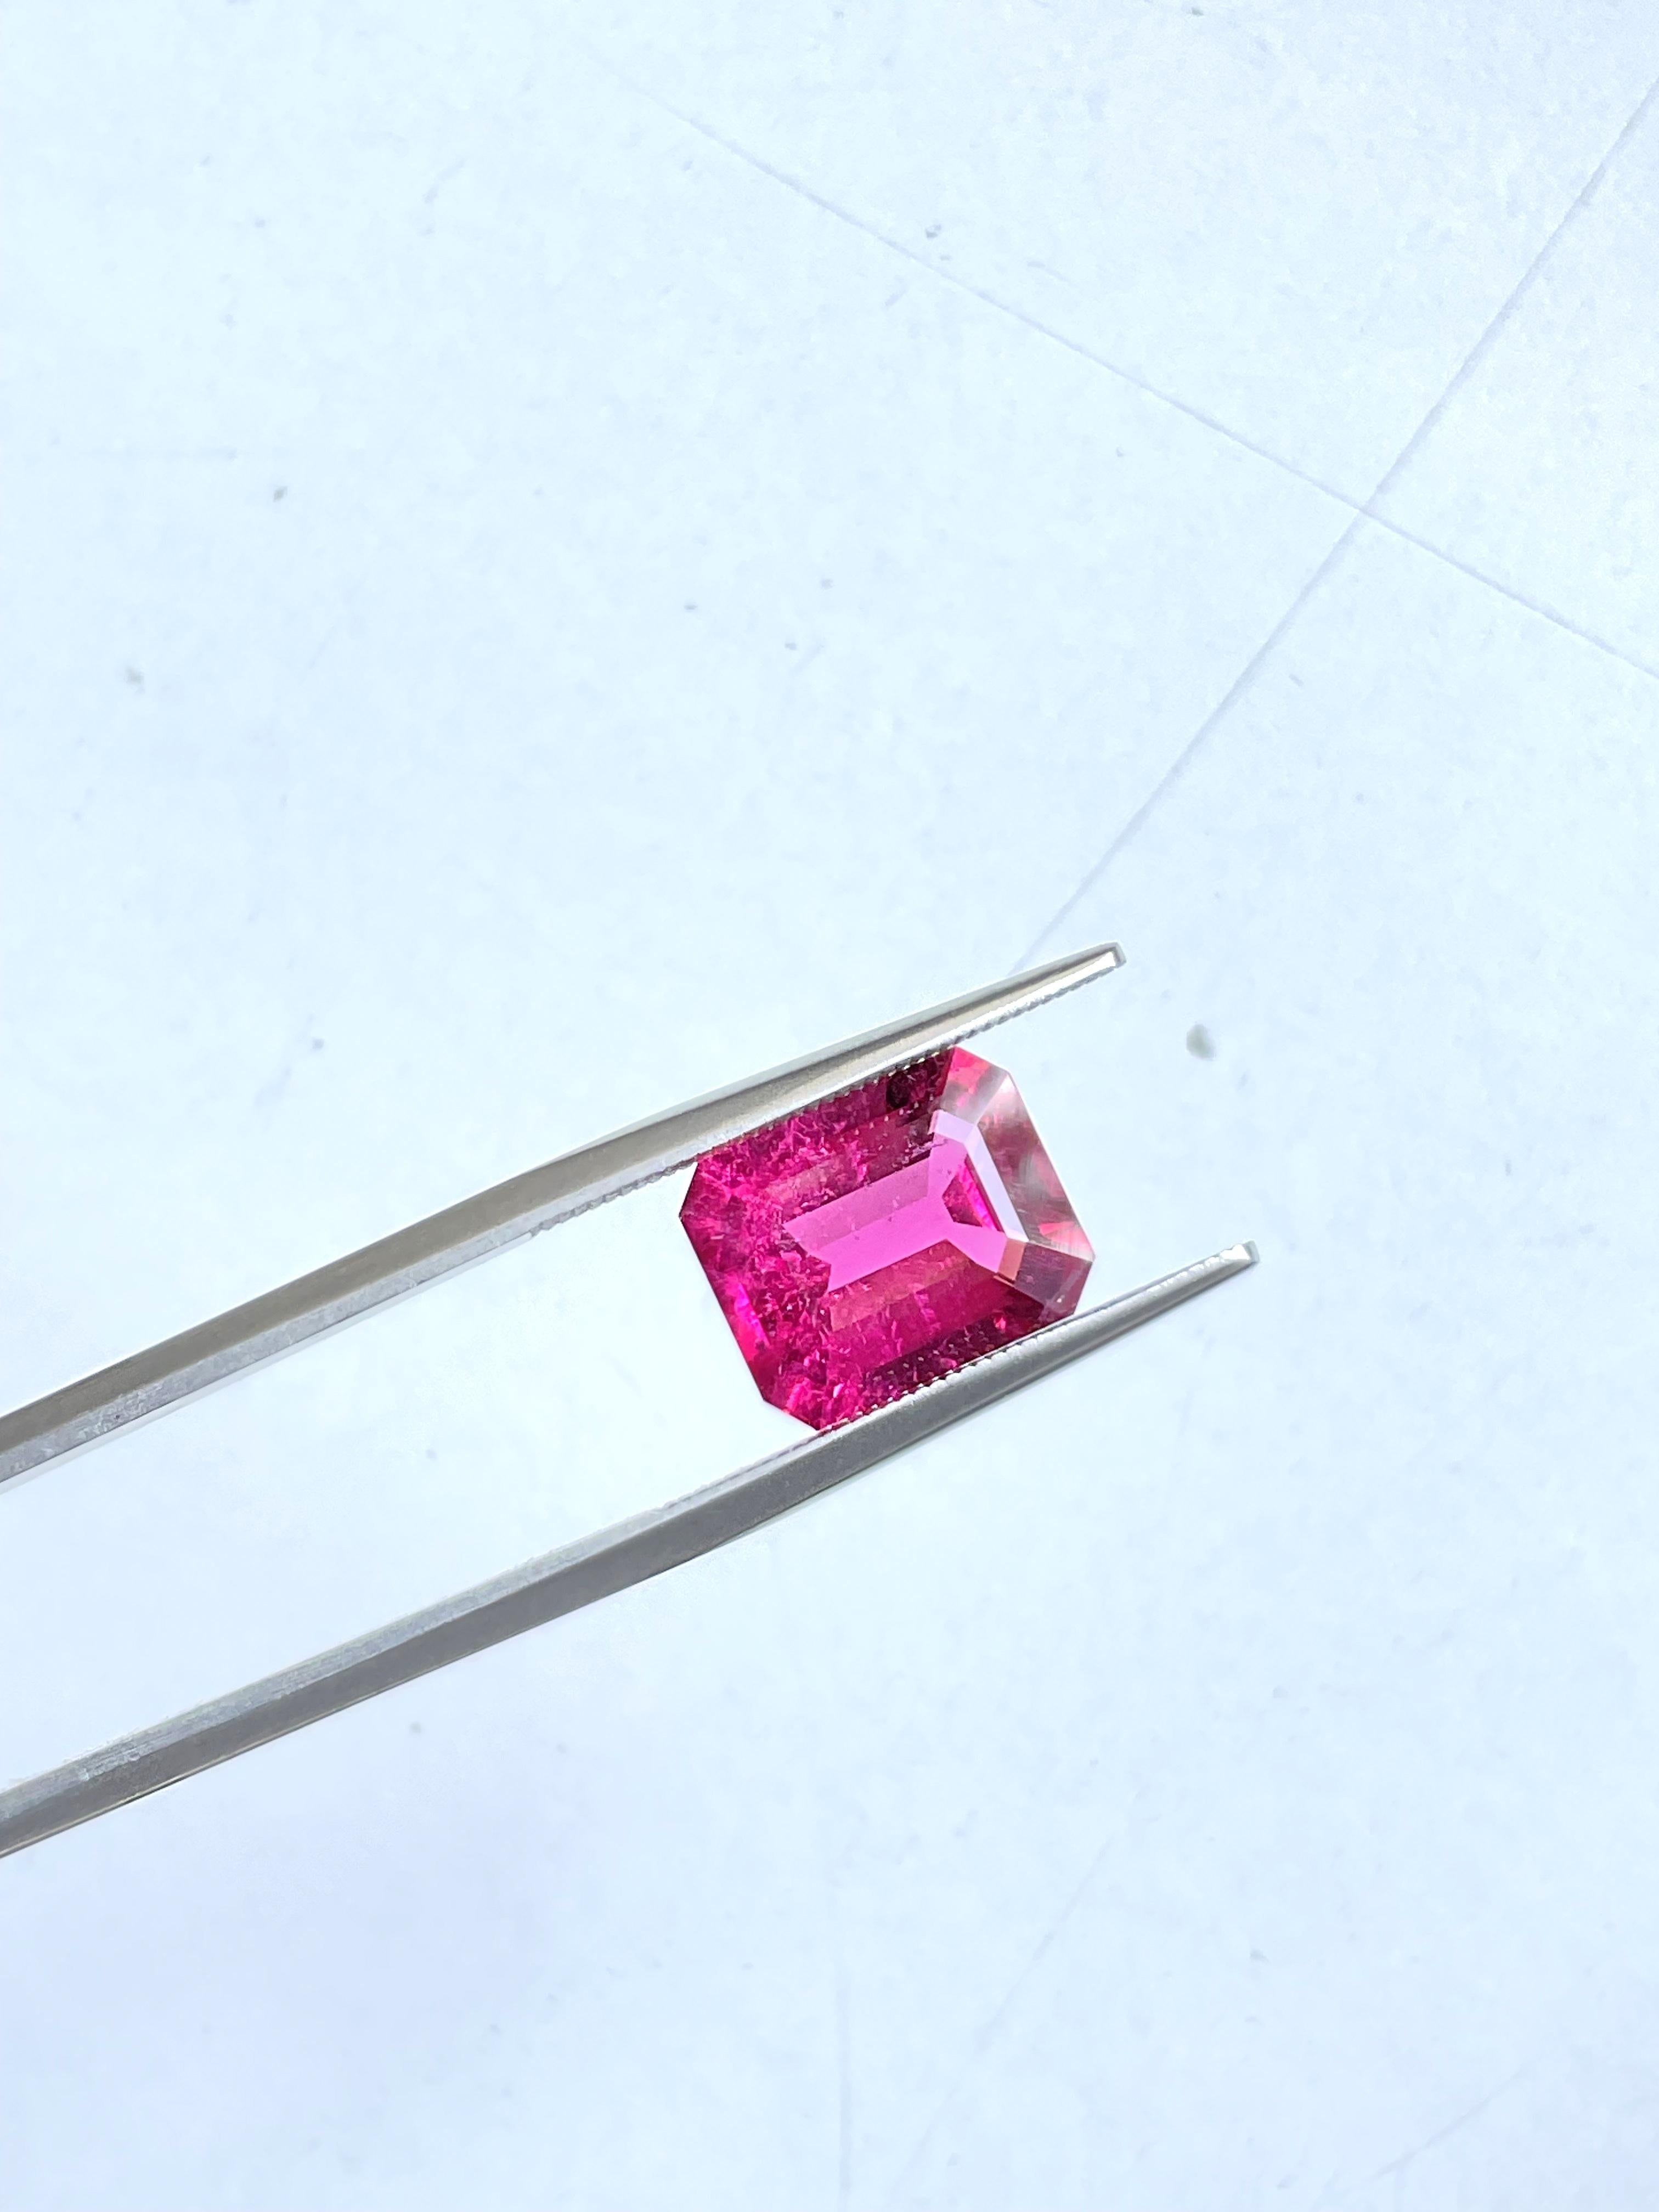 4.08 Carats Rubellite Tourmaline Octagon Cut Stone For Fine Jewelry Natural gem For Sale 3